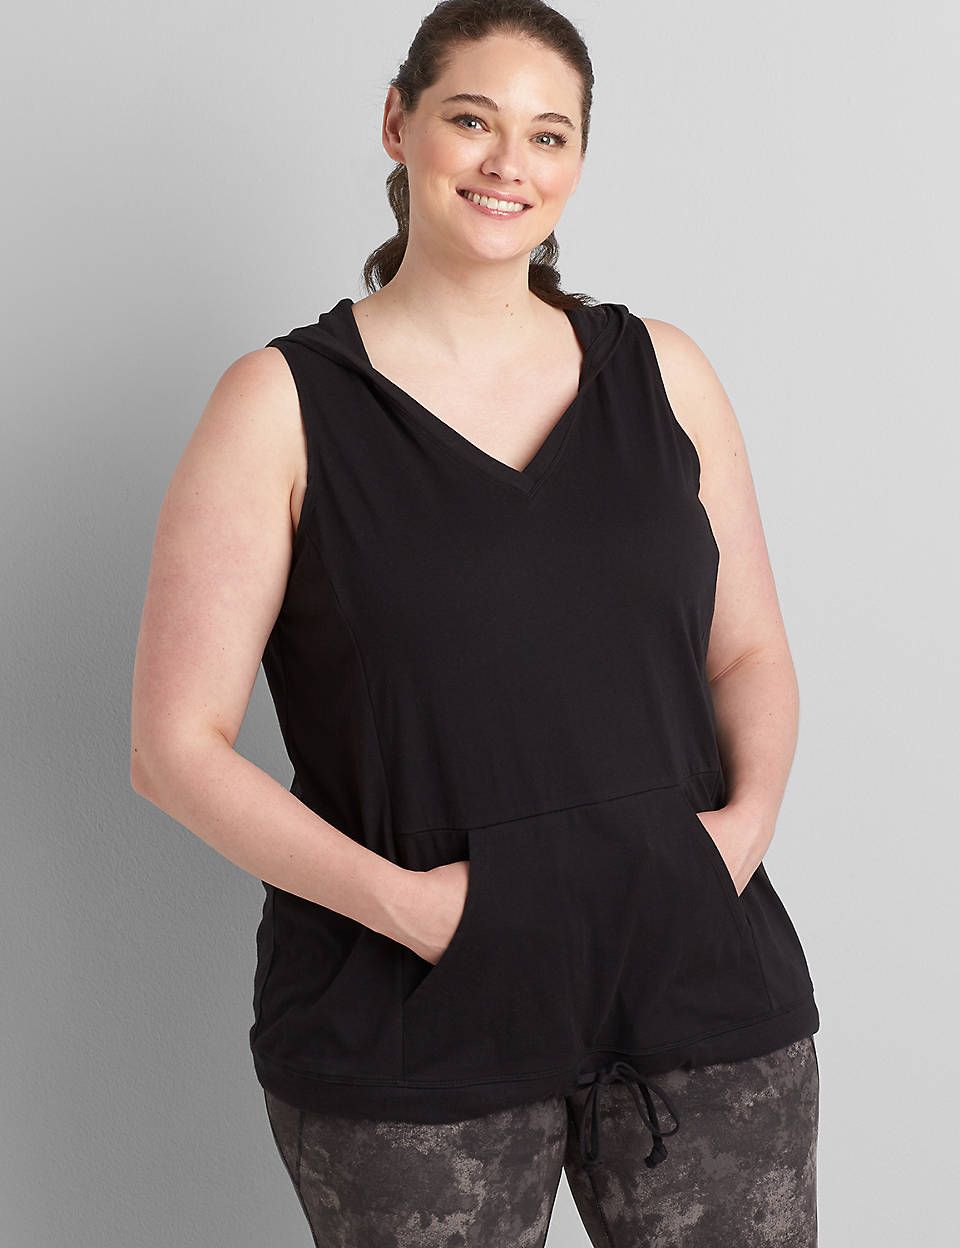 21 best plus-size workout clothes for women - TODAY